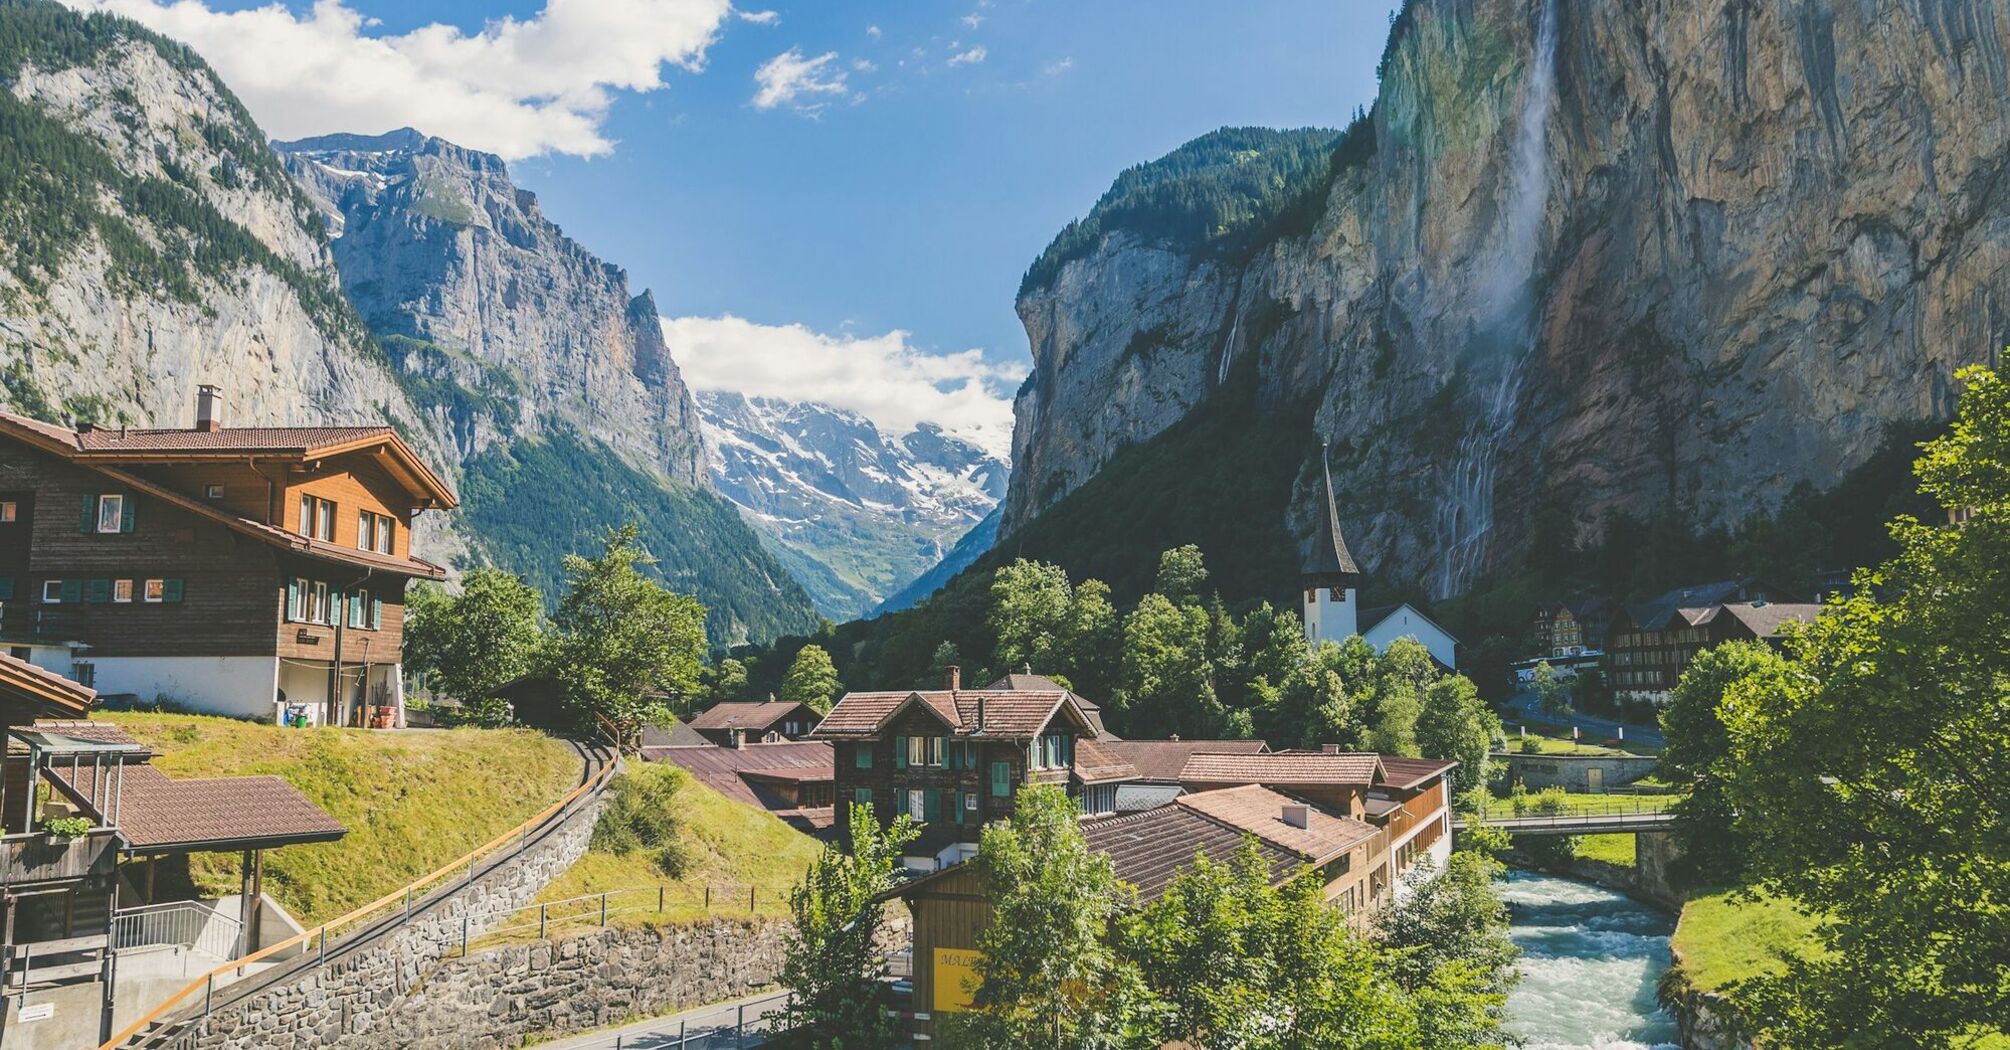 Scenic view of a Swiss village in the Alps with a waterfall and mountains in the background